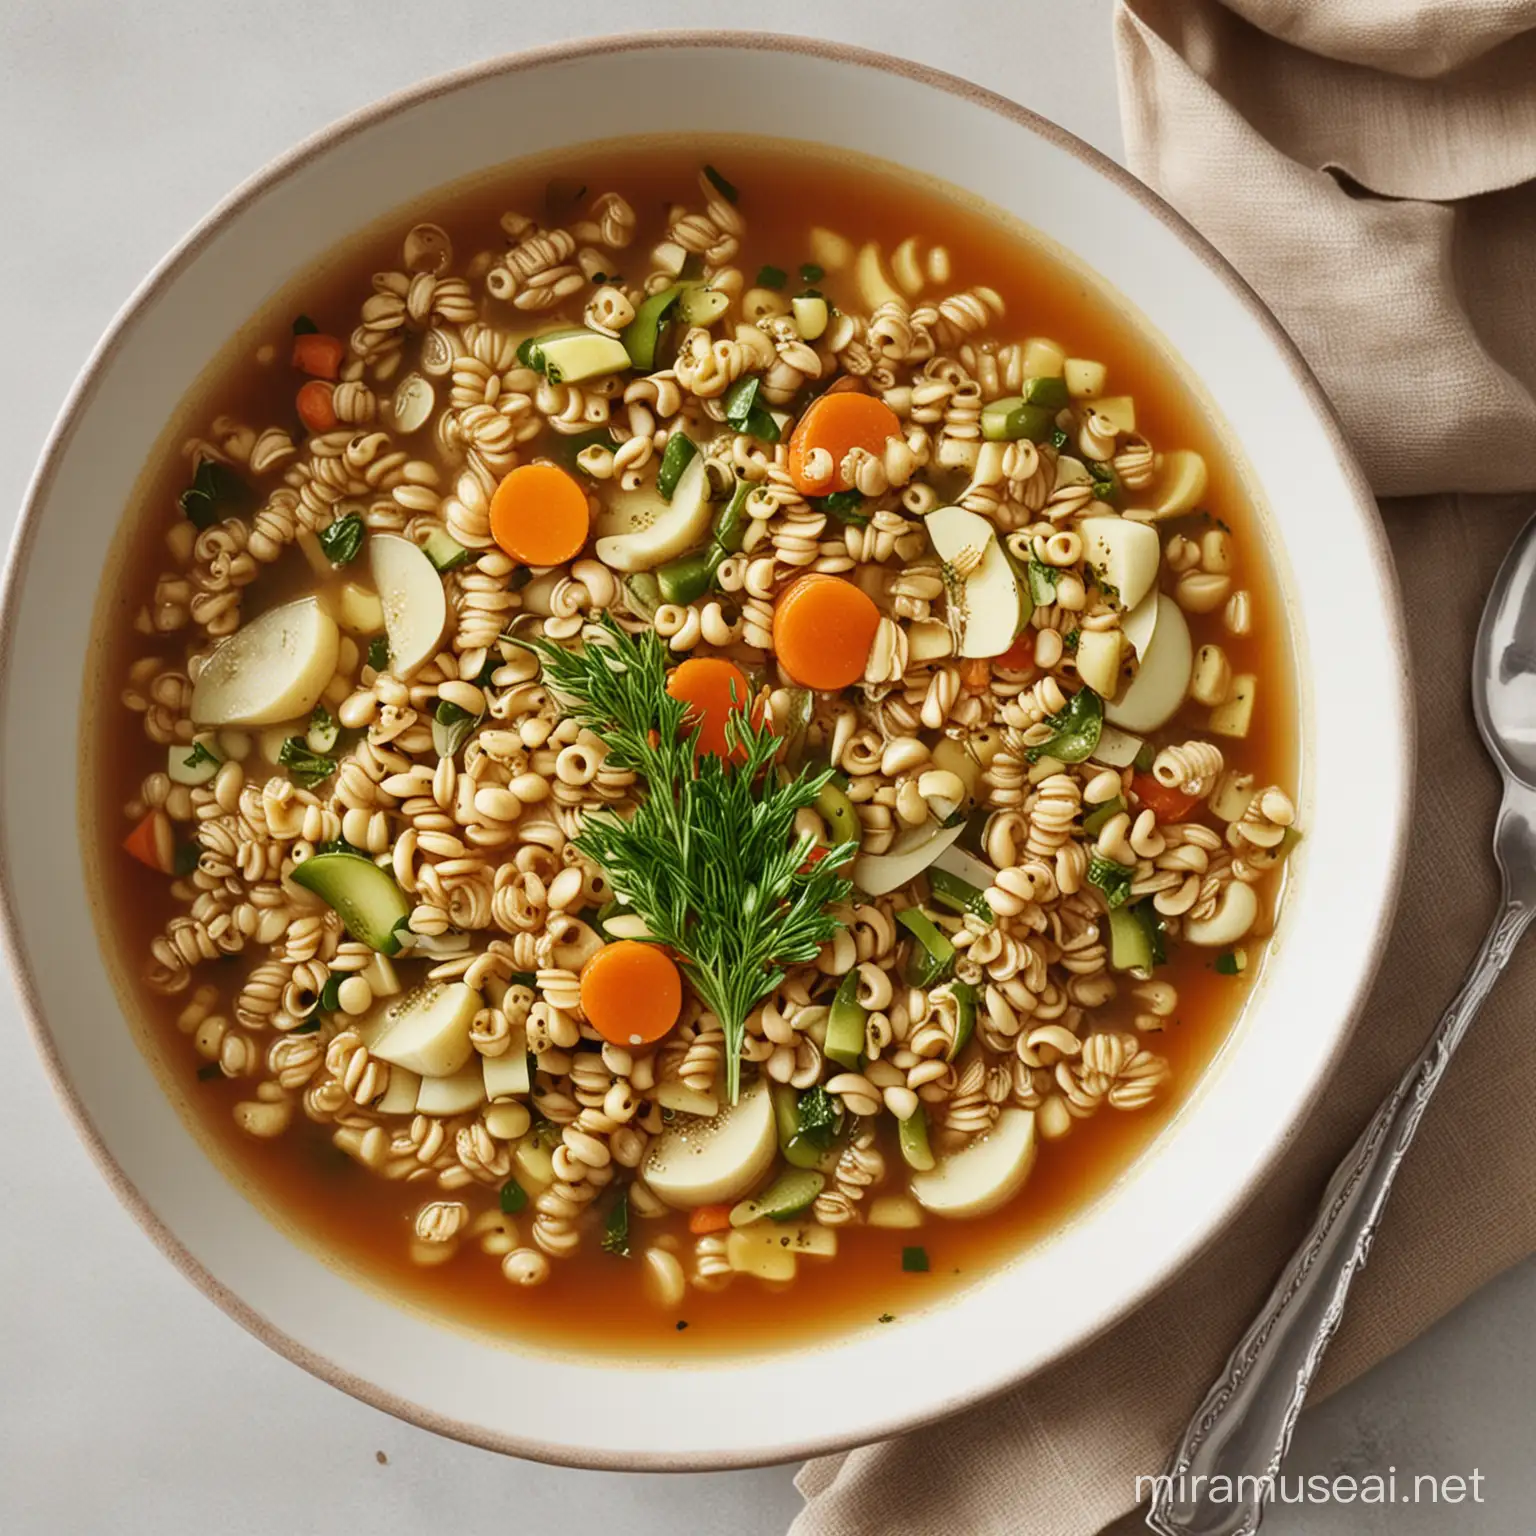 Colorful Vegetable and Cereal Broth Healthy and Nourishing Soup Concept